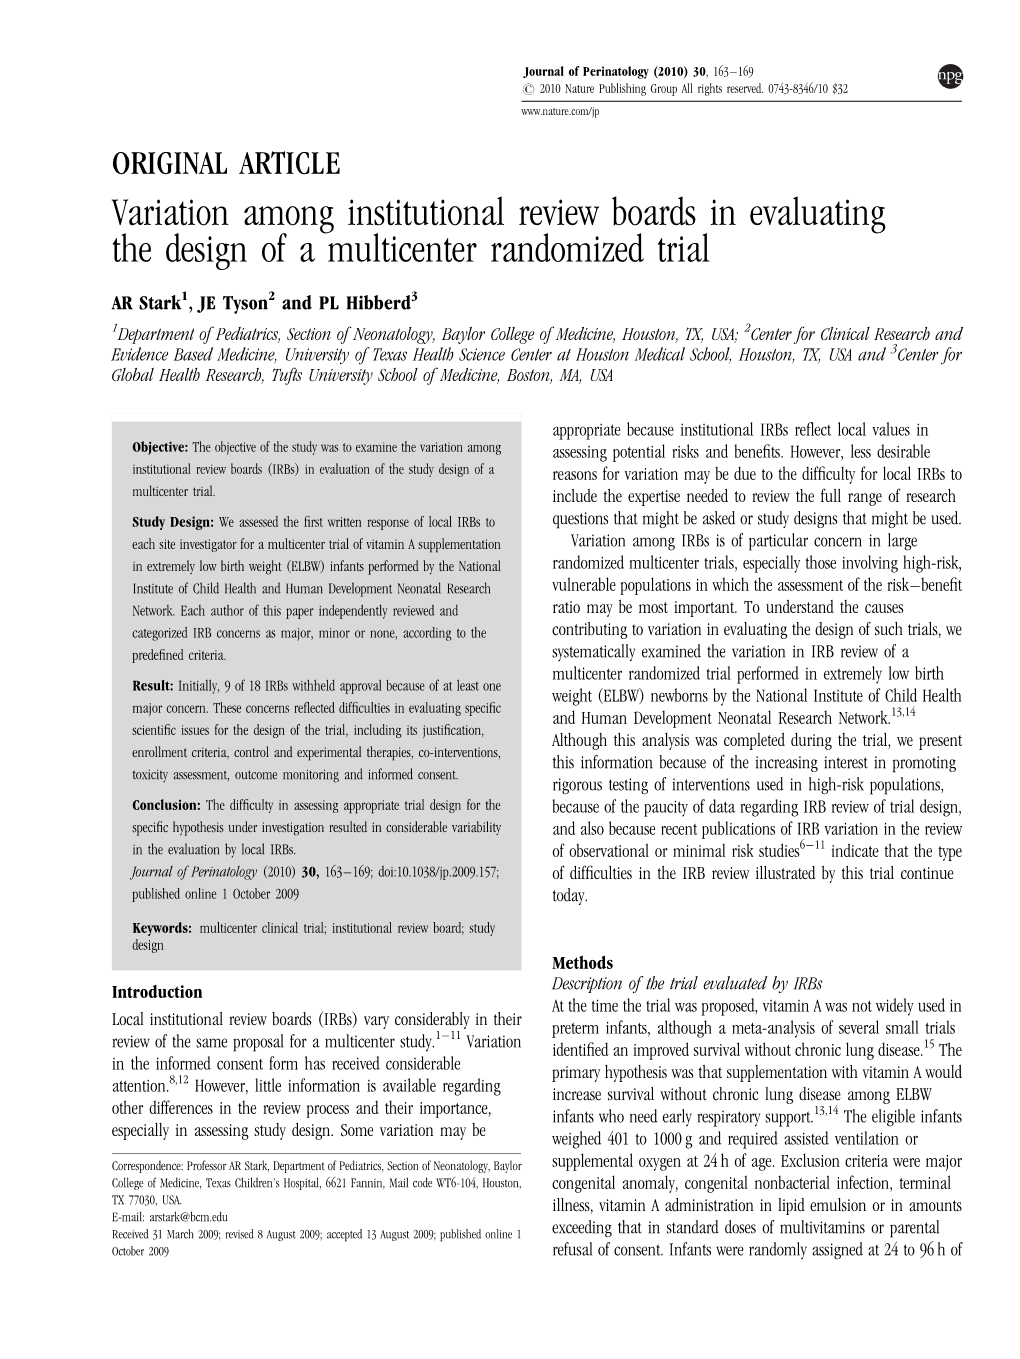 Variation Among Institutional Review Boards in Evaluating the Design of a Multicenter Randomized Trial